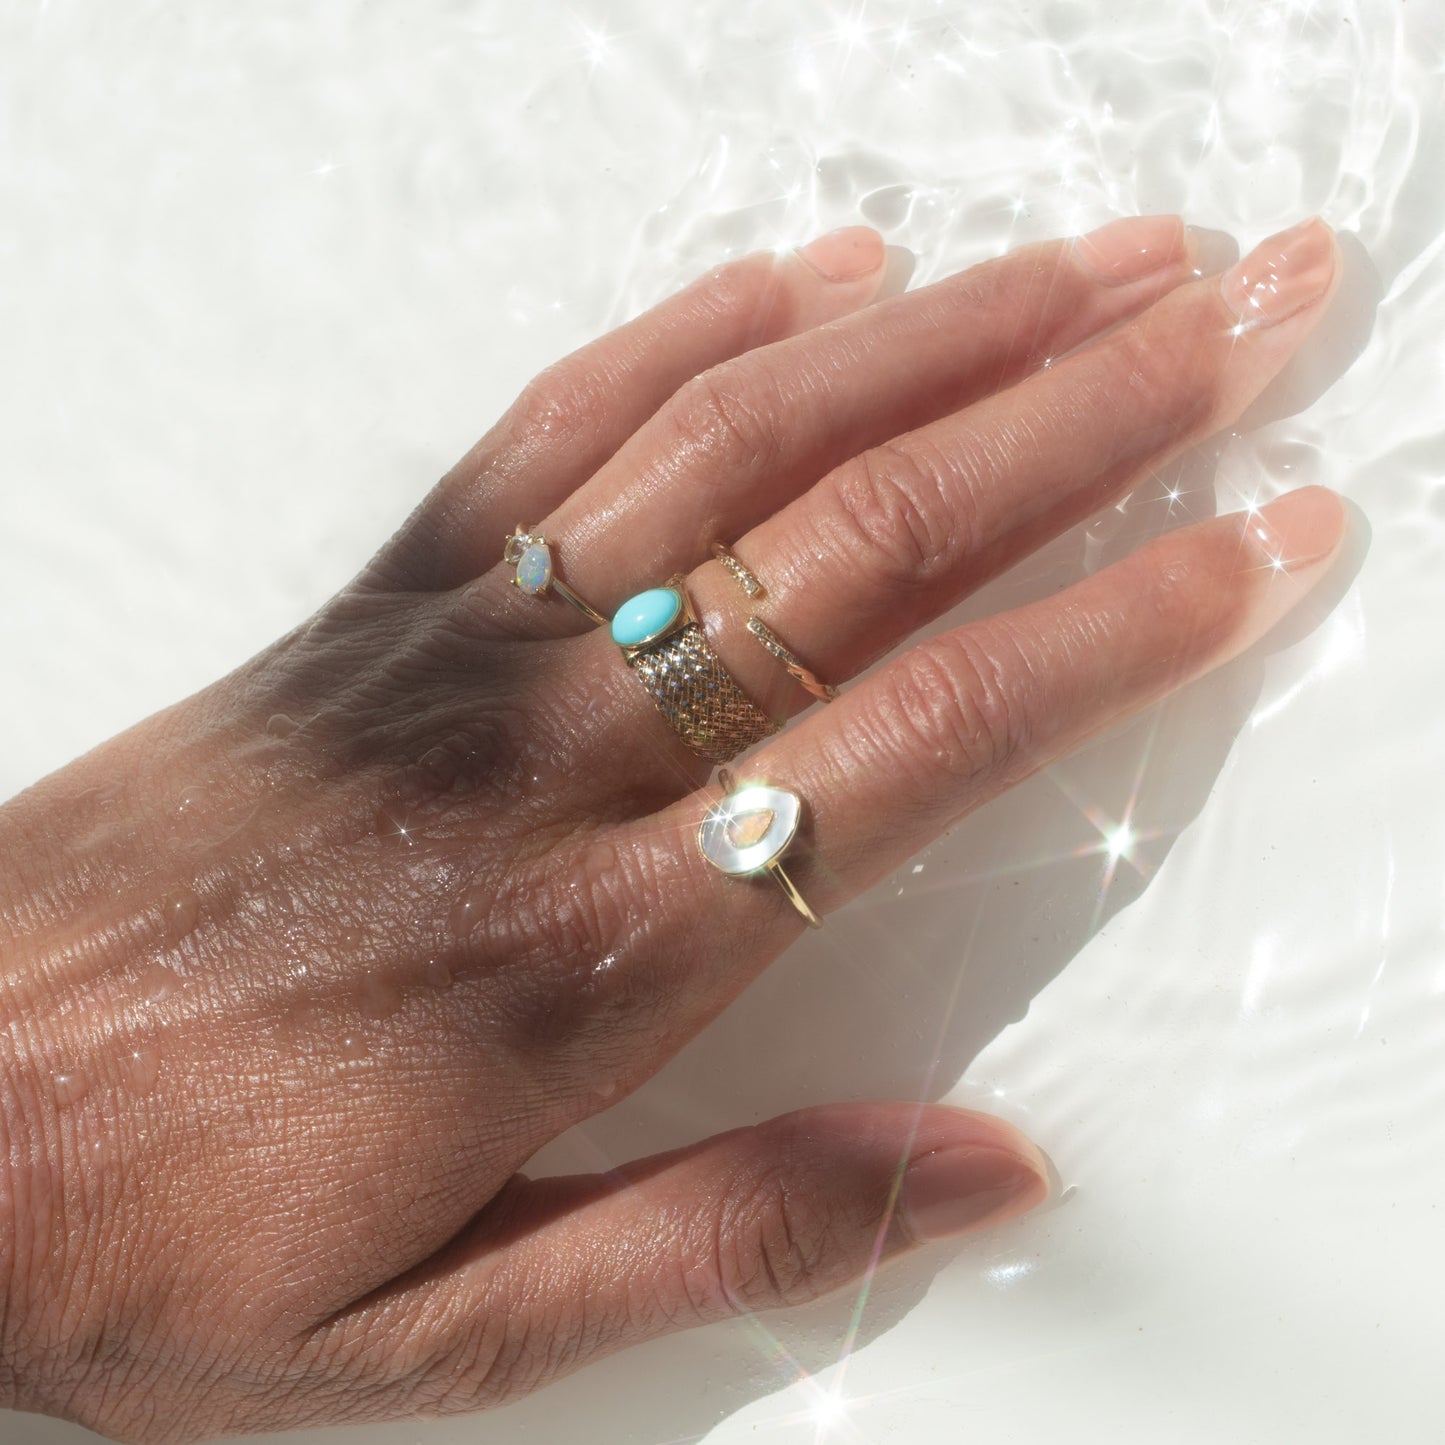 Solid Gold Opal and Mother of Pearl Organic Teardrop Ring